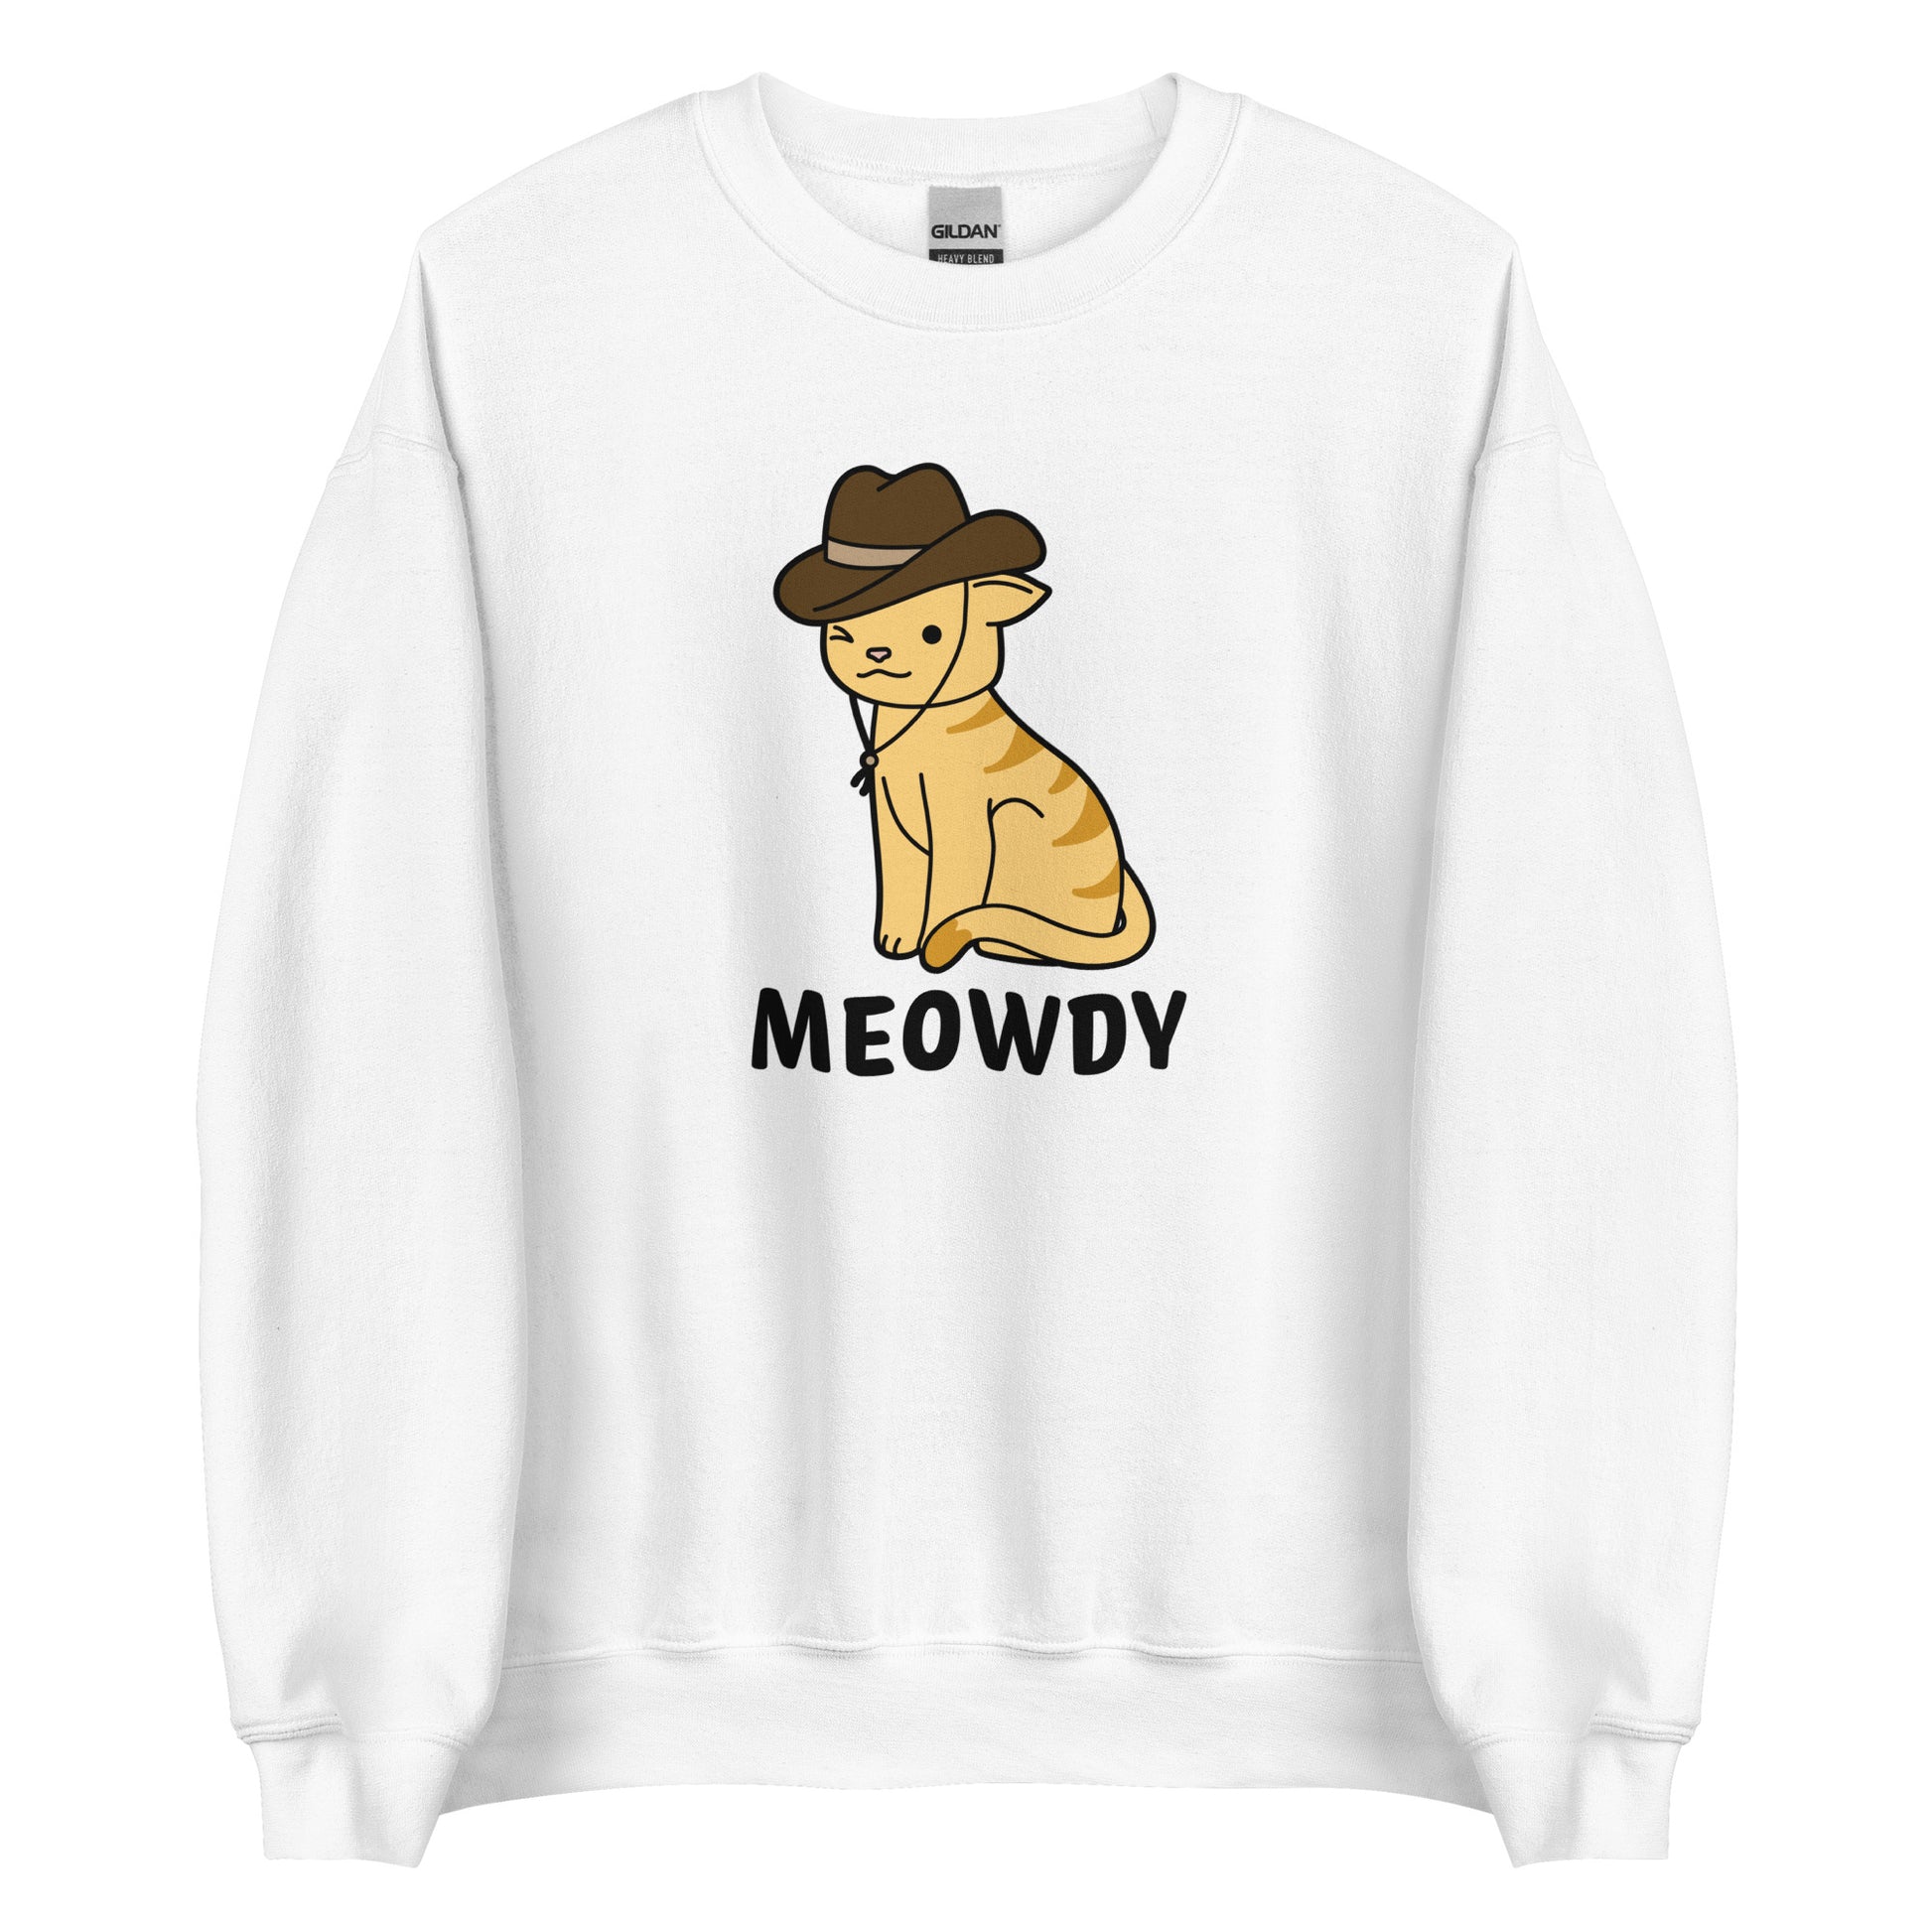 A white crewneck sweatshirt featuring an illsutration of an orange striped cat. The cat is wearing a cowboy hat and winking. Text beneath him reads "Meowdy".